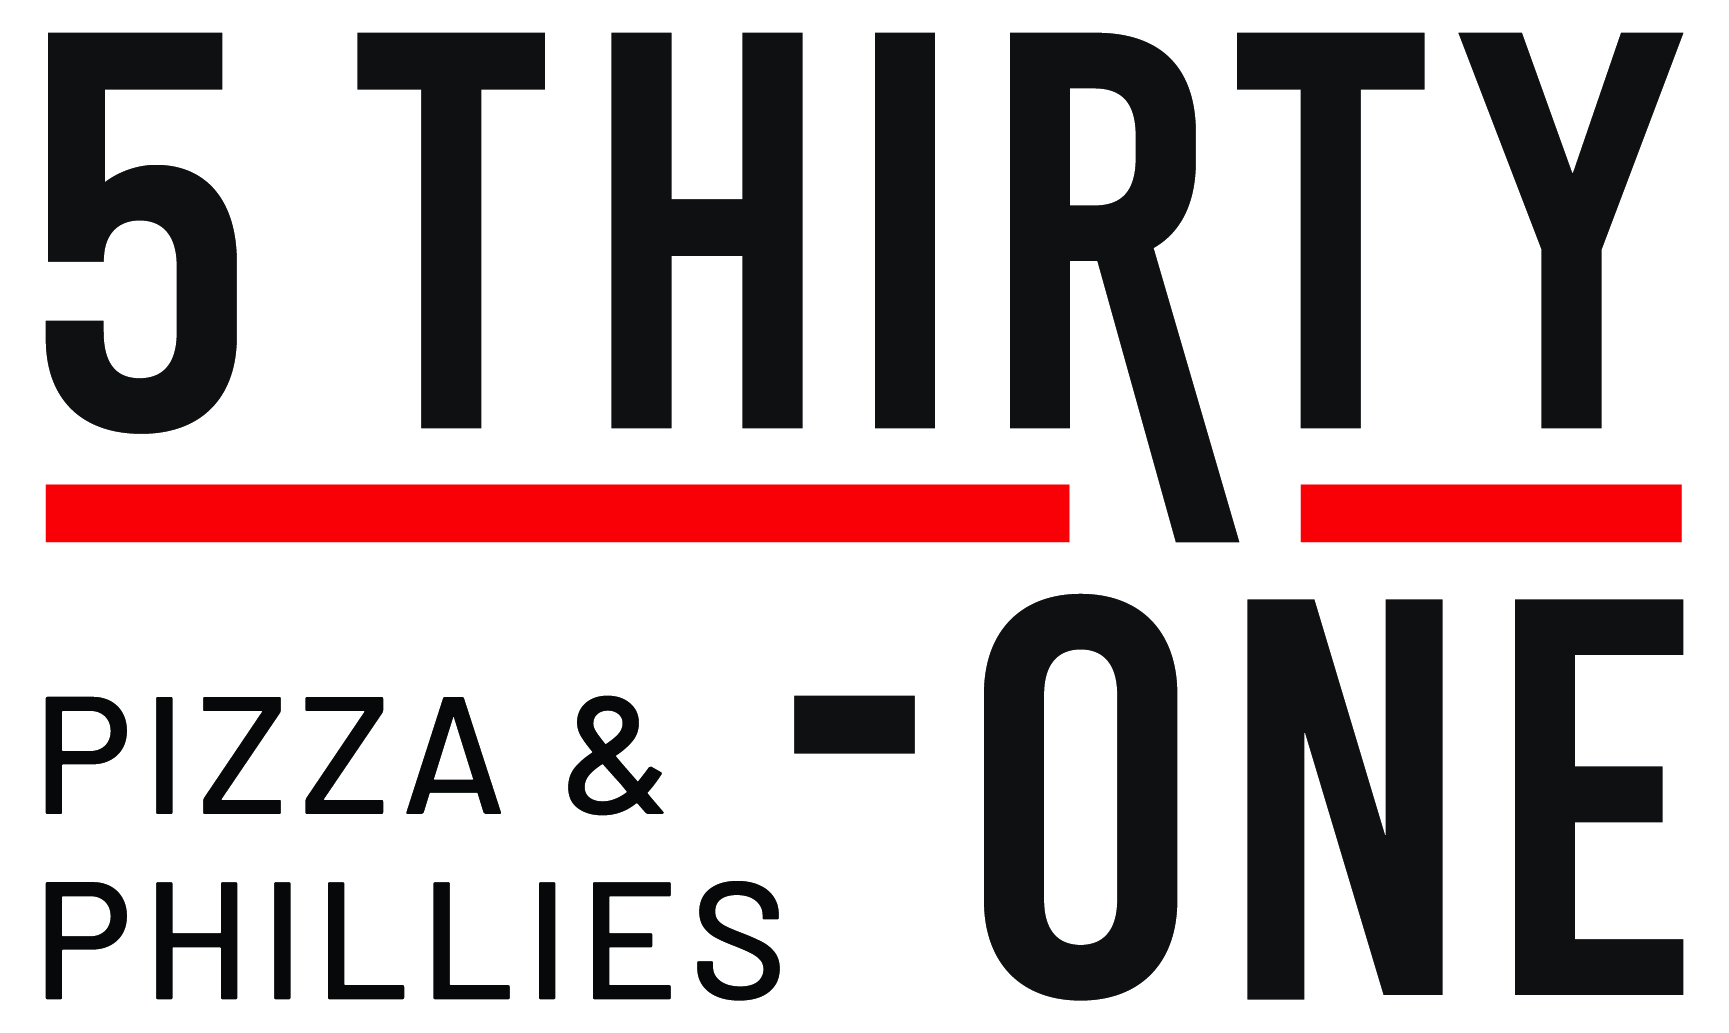 5 Thirty-One Pizza & Phillies